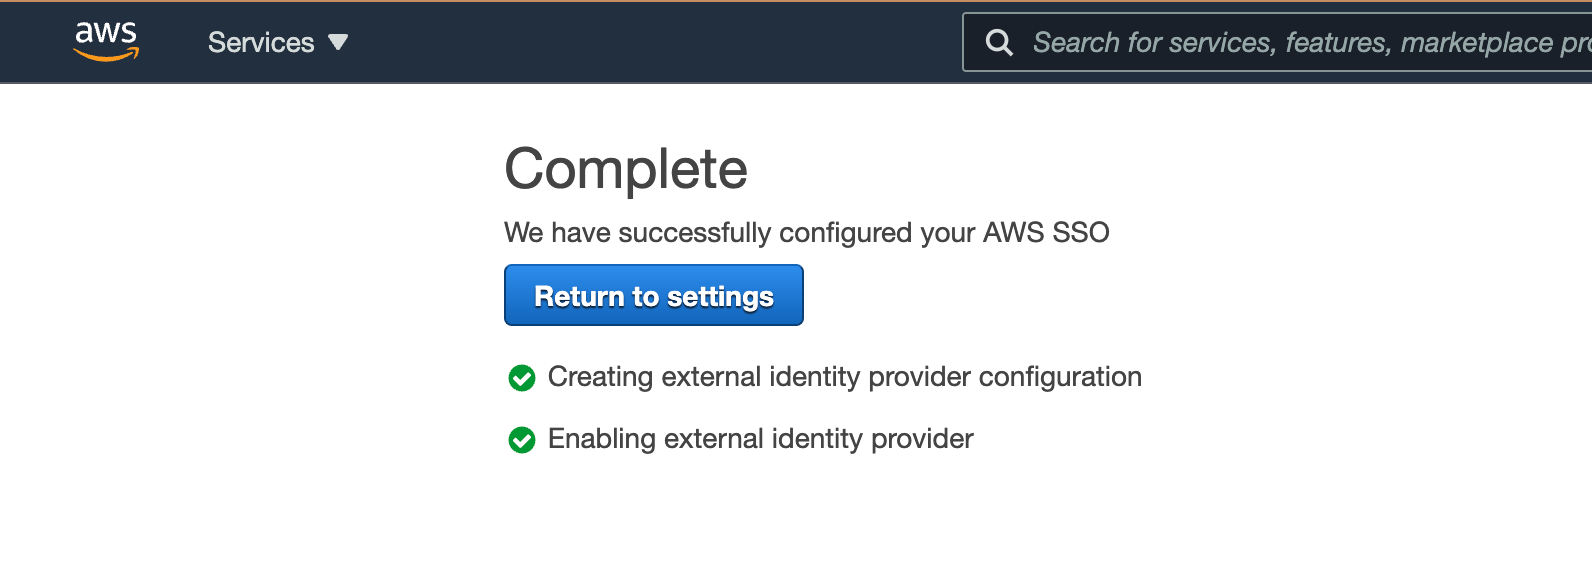 Completed AWS SSO configuration